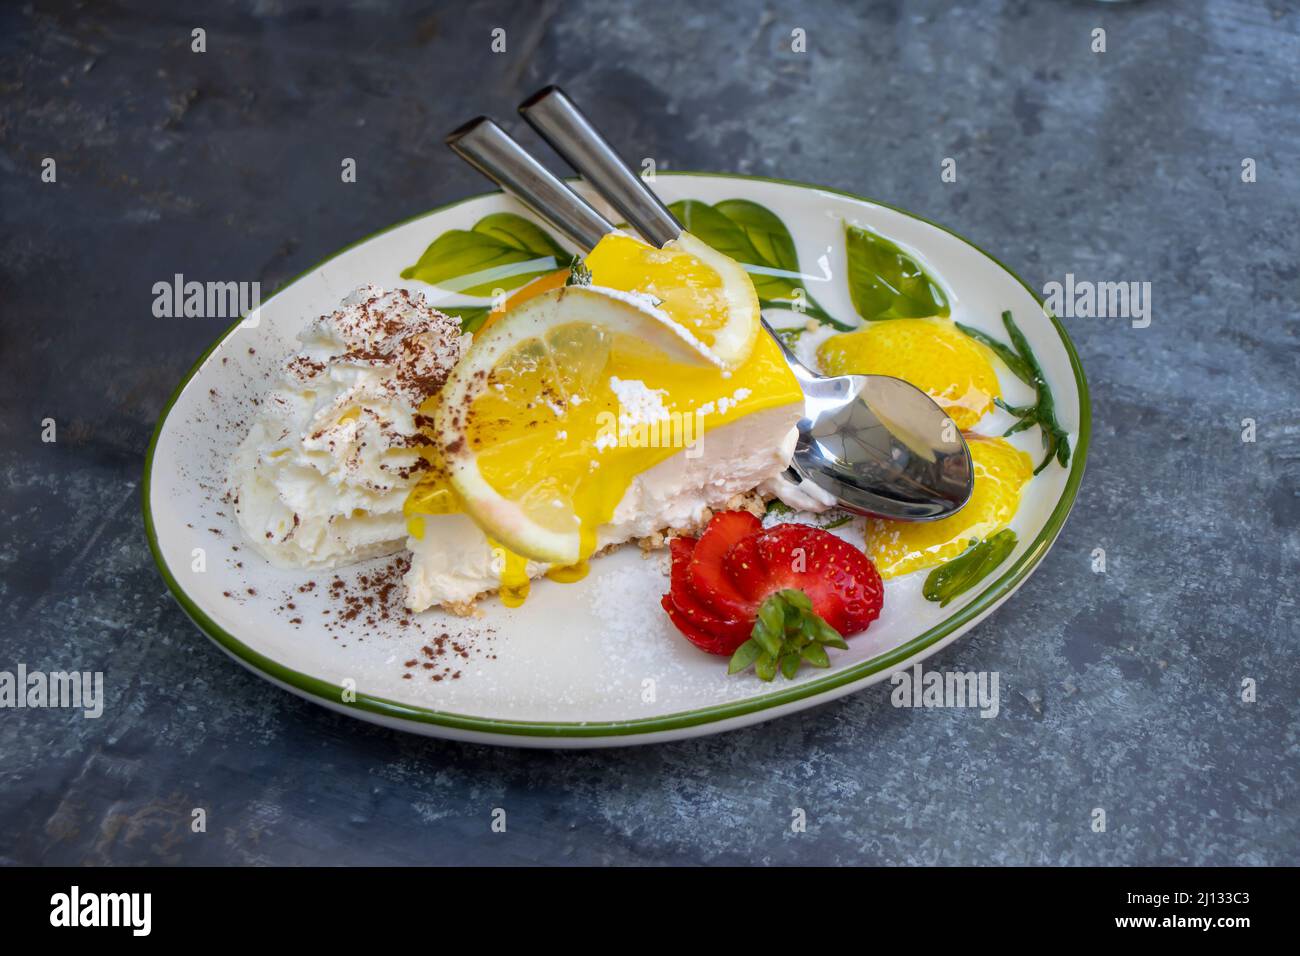 Slice of lemon cake with strawberry and whipped cream Stock Photo